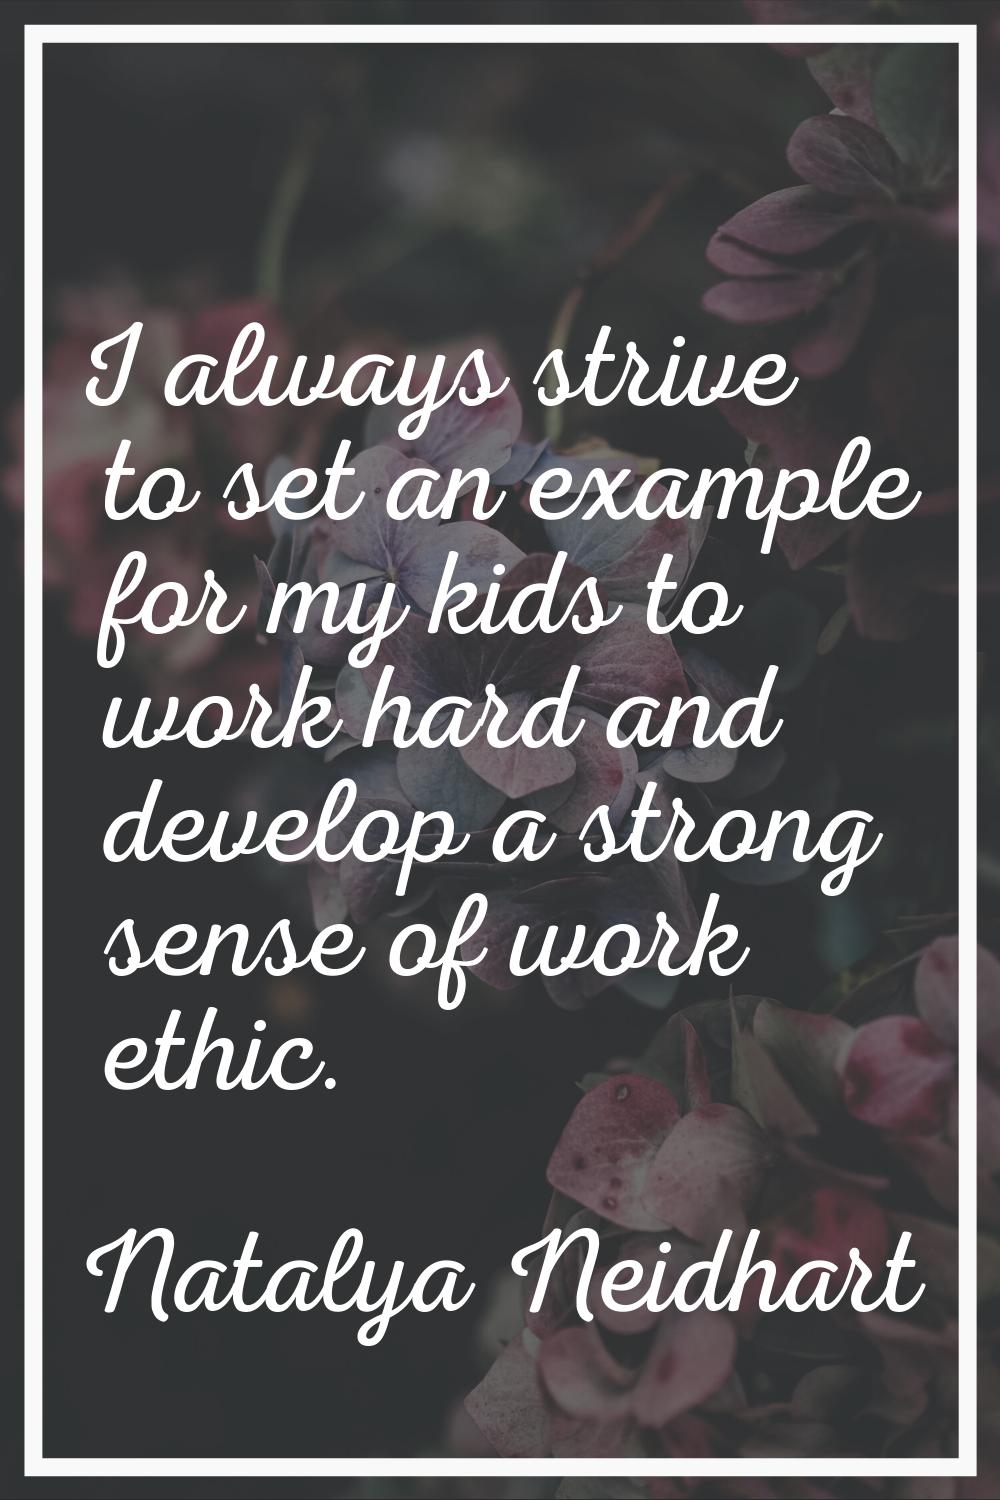 I always strive to set an example for my kids to work hard and develop a strong sense of work ethic